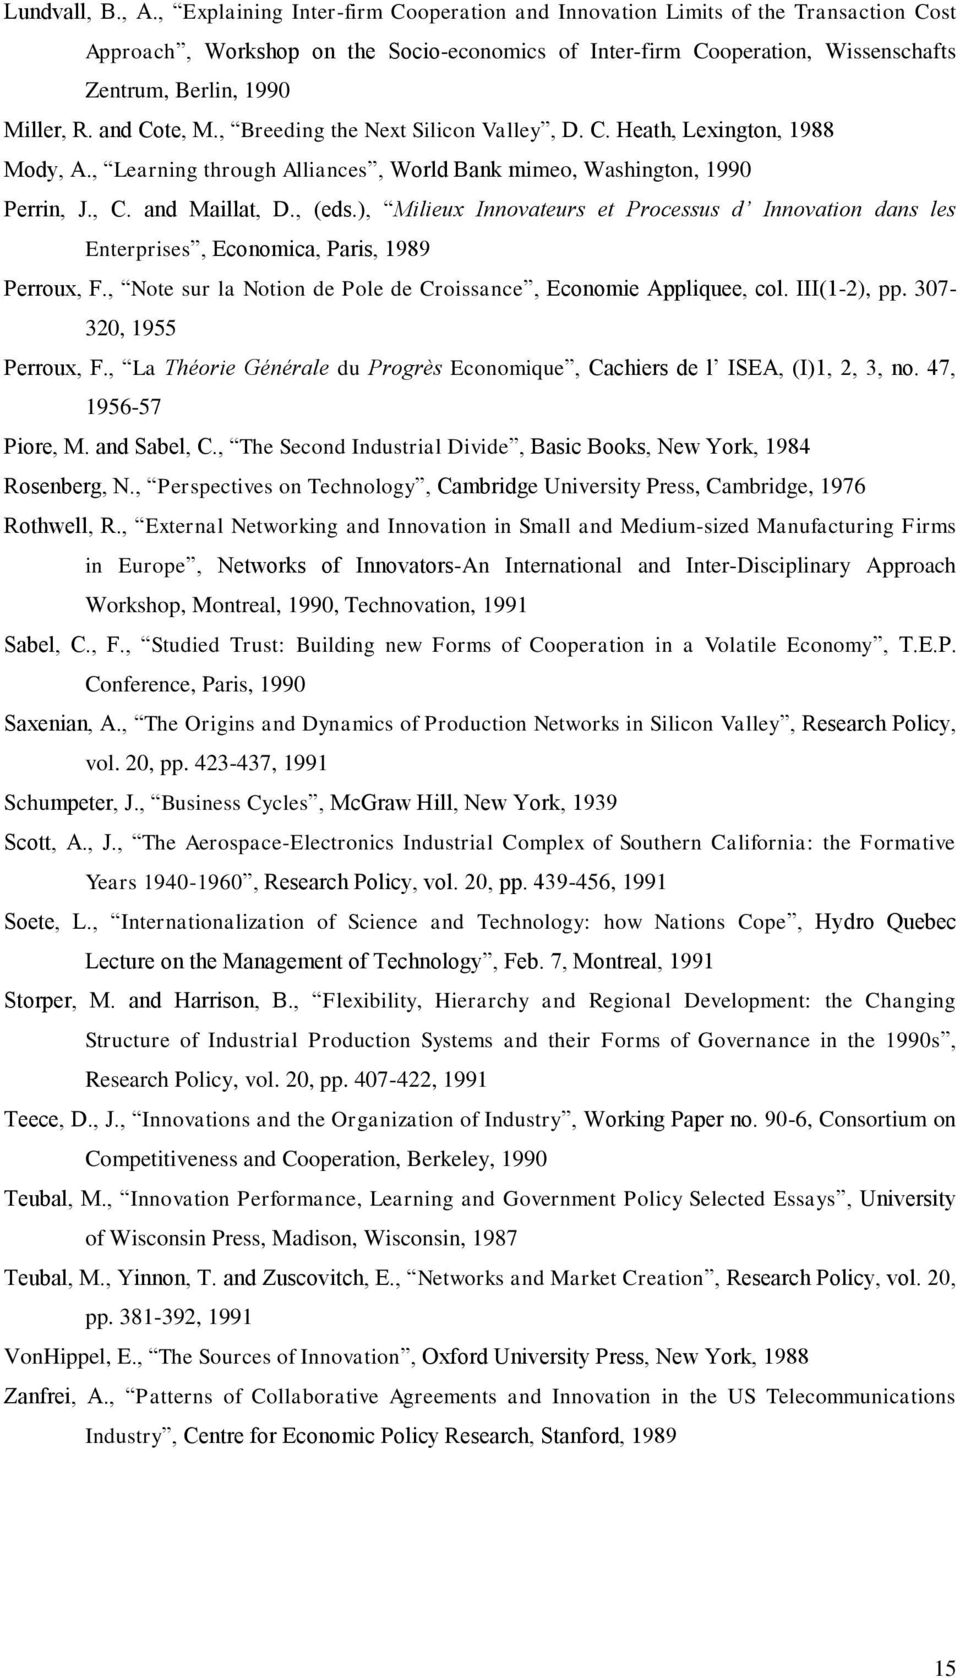 and Cote, M., Breeding the Next Silicon Valley, D. C. Heath, Lexington, 1988 Mody, A., Learning through Alliances, World Bank mimeo, Washington, 1990 Perrin, J., C. and Maillat, D., (eds.